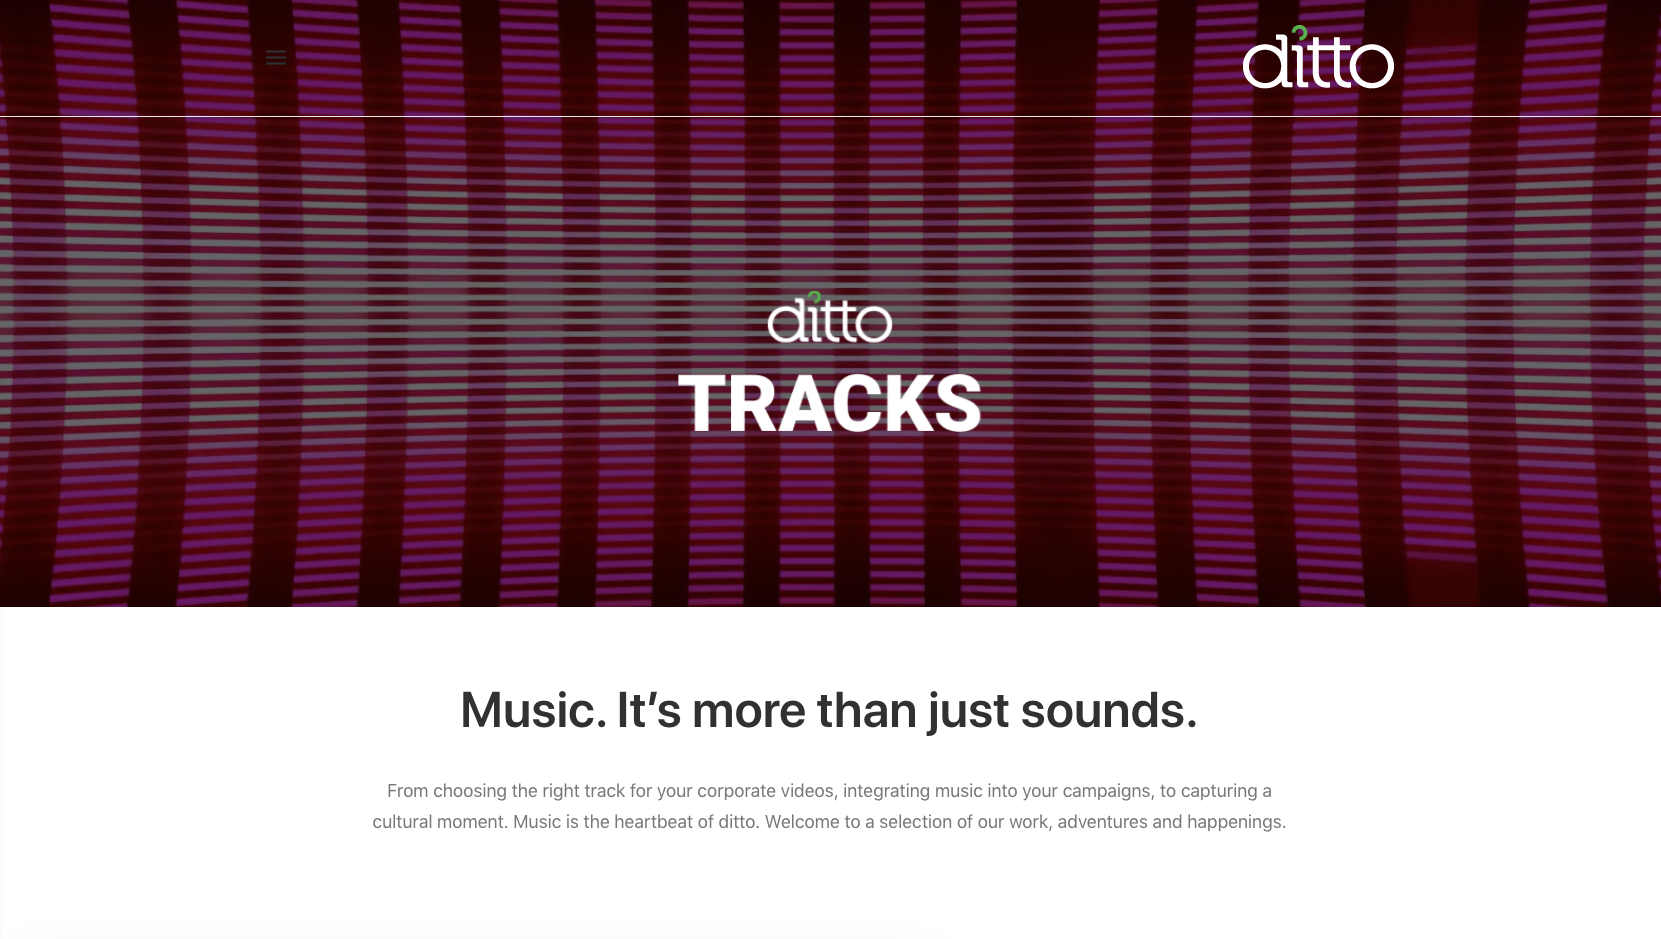 DITTO X - playlist by Ditto Music